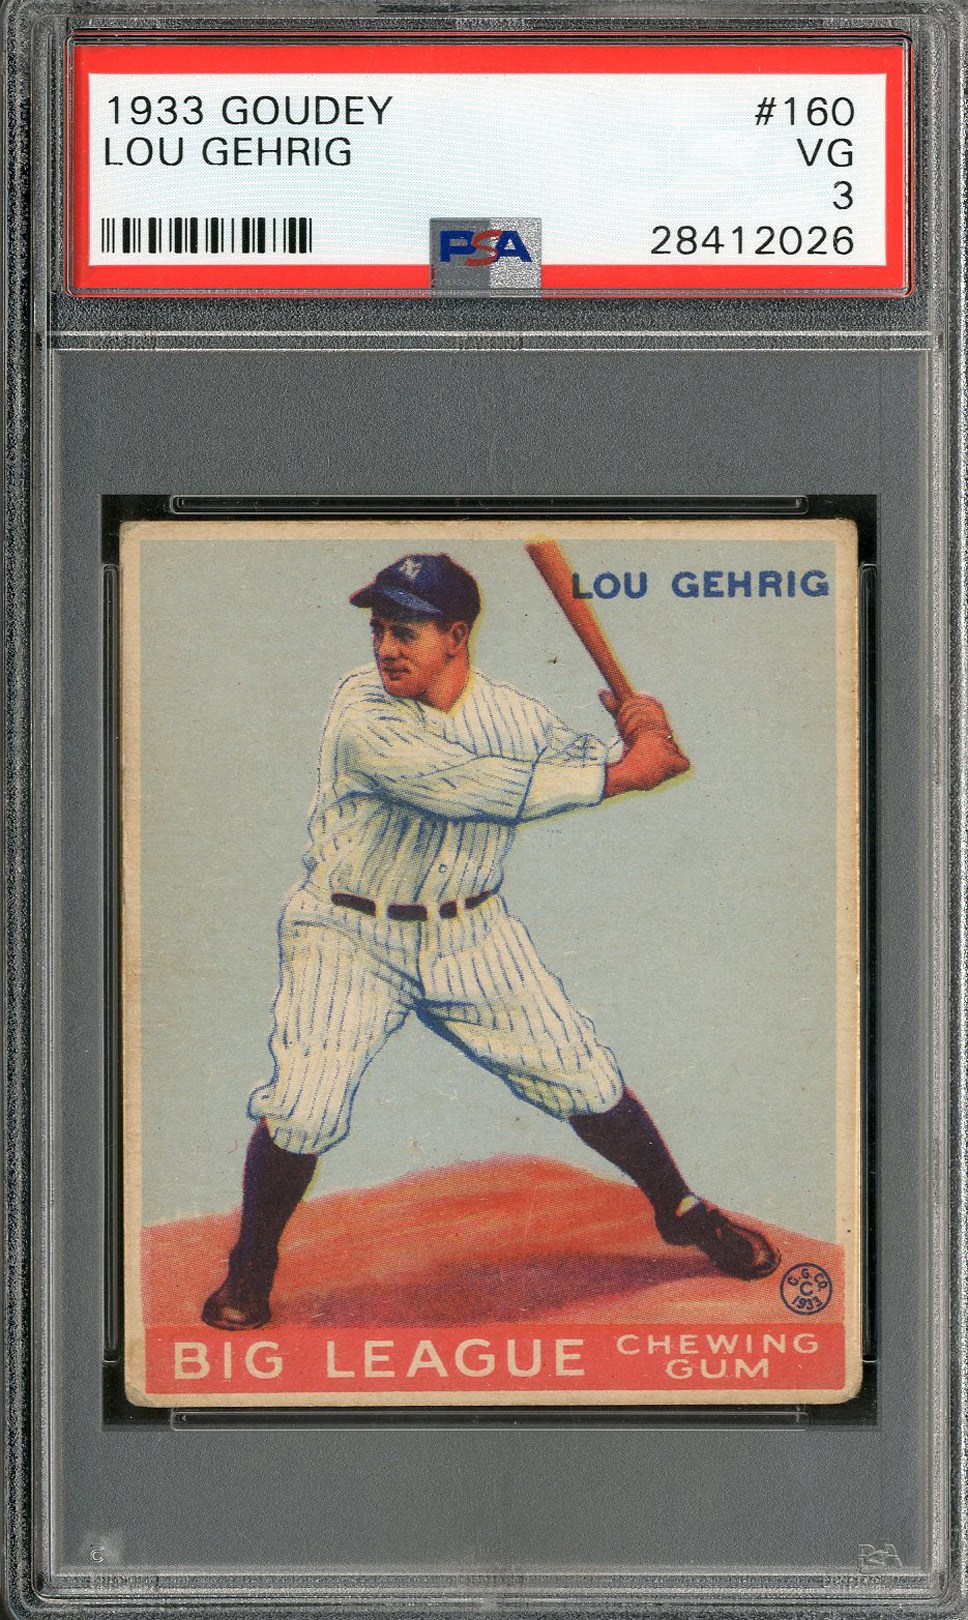 Baseball and Trading Cards - 1933 Goudey #160 Lou Gehrig - PSA VG 3